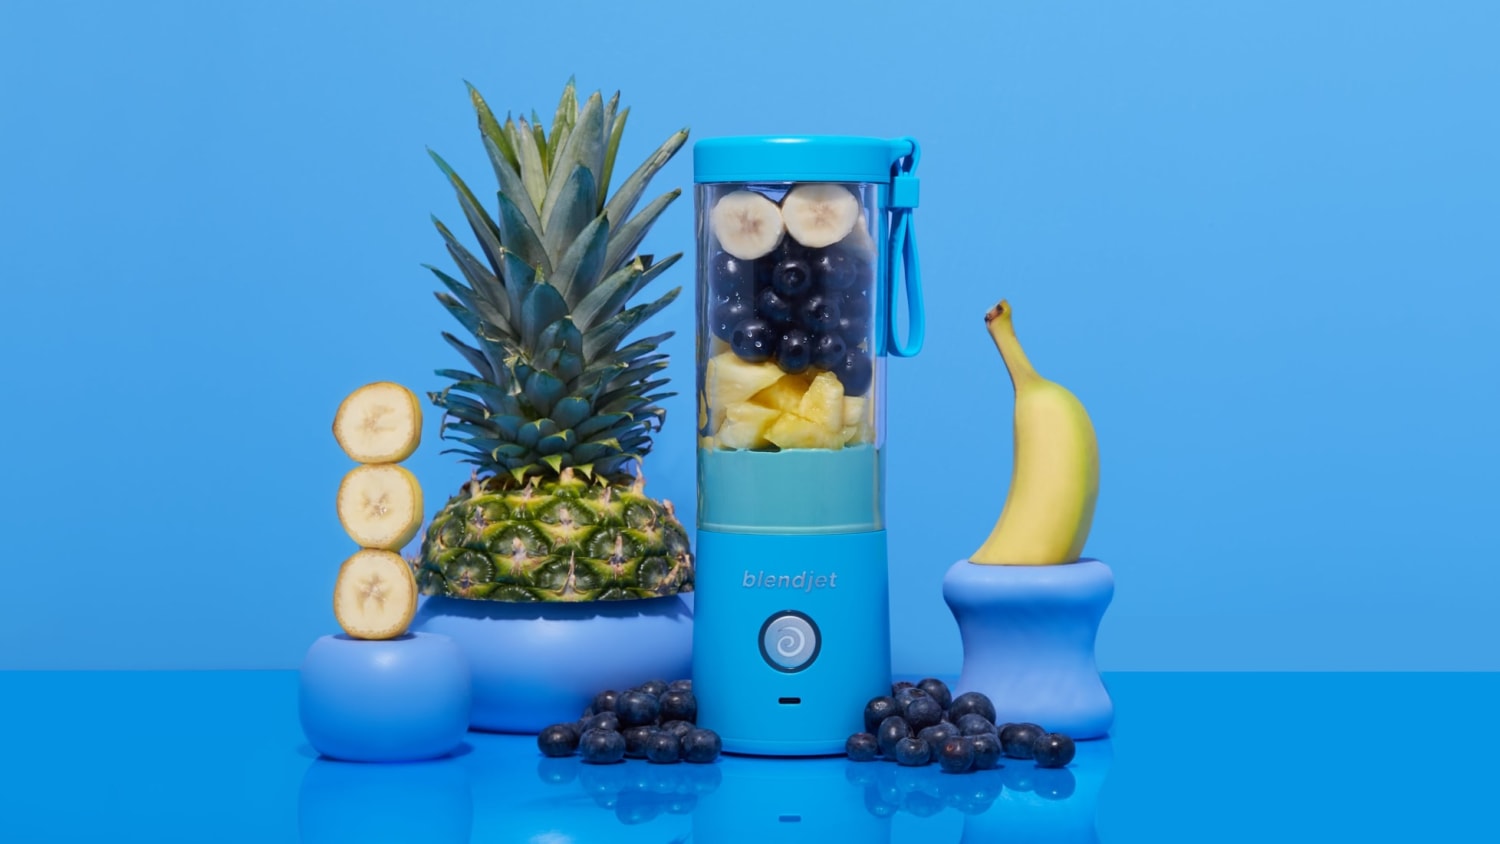  Blend Jet Portable Blender for Shakes and Smoothies